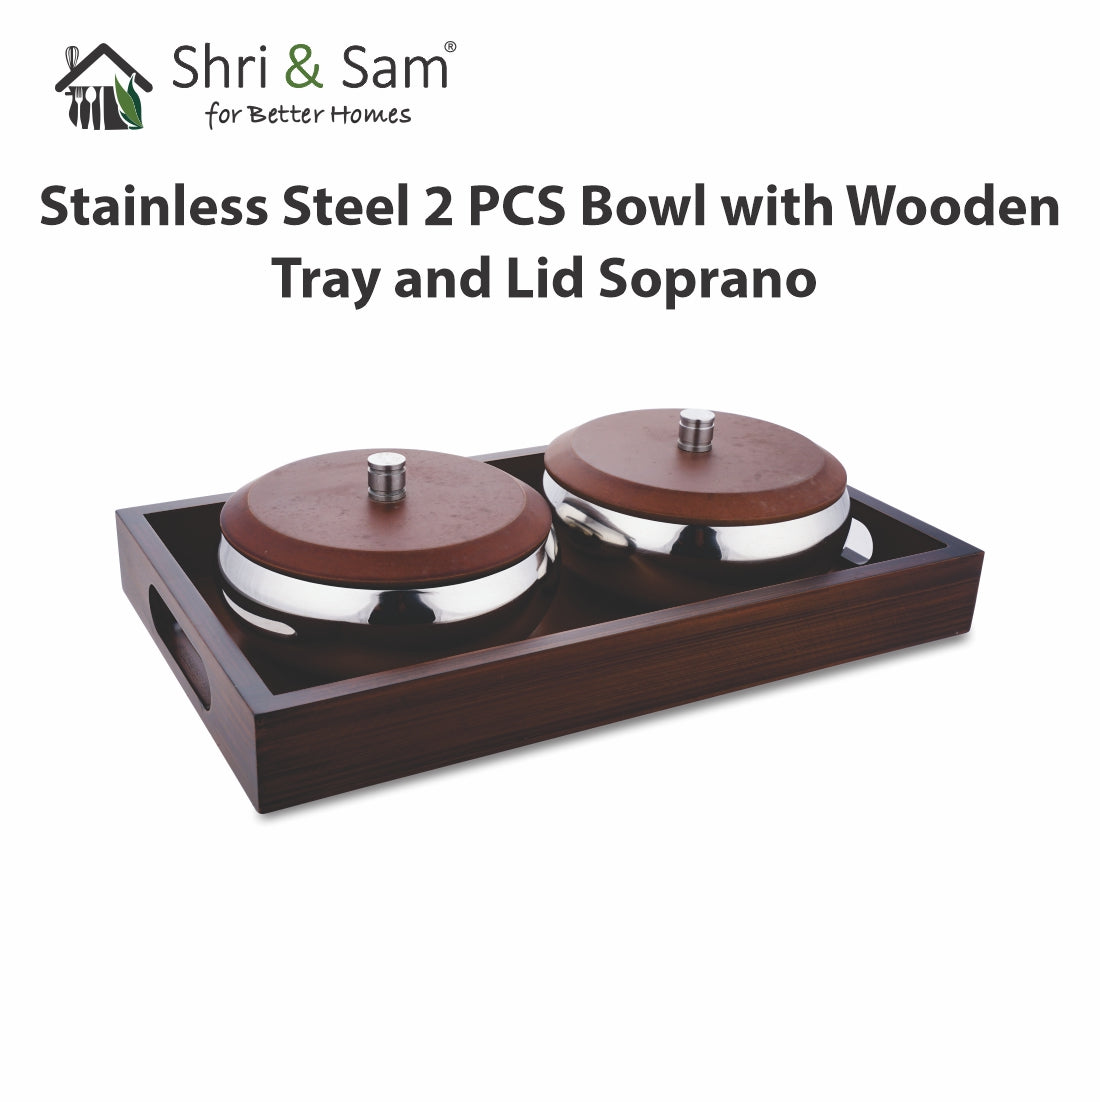 Stainless Steel 2 PCS Bowl with Wooden Tray and Lid Soprano